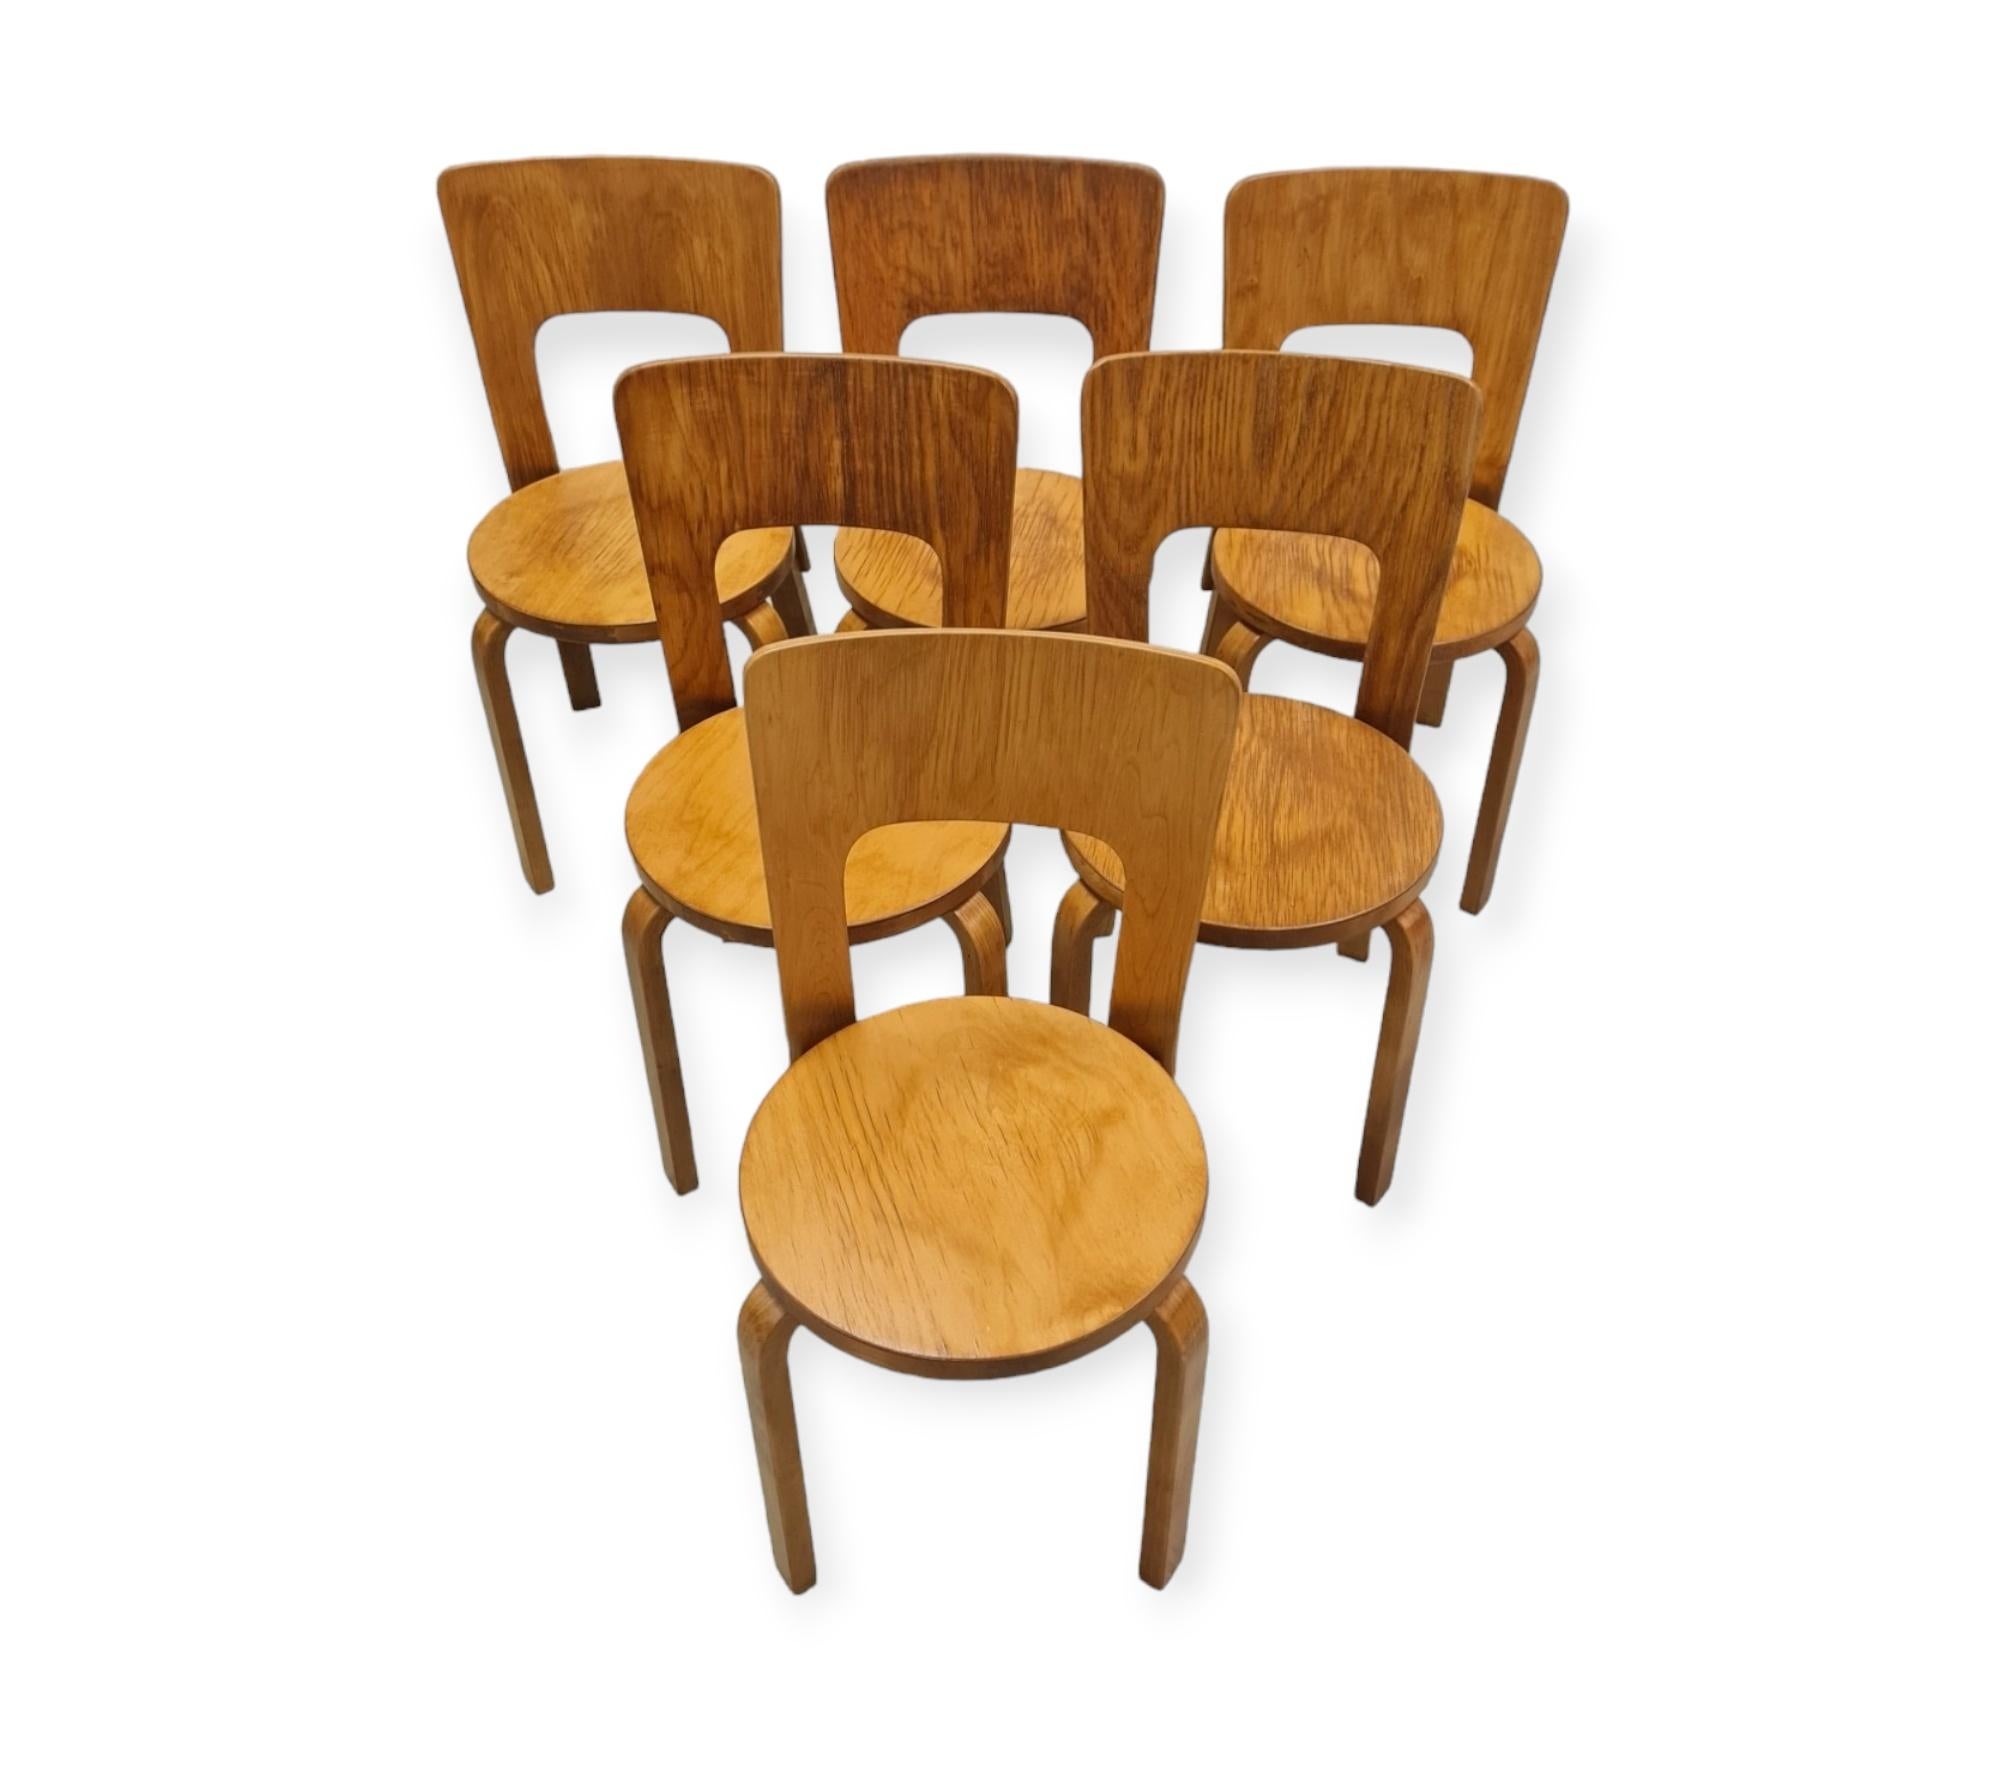 Alvar Aalto Dining Set with Lazy Susan and 6 Model 66 chairs, 1940s For Sale 11